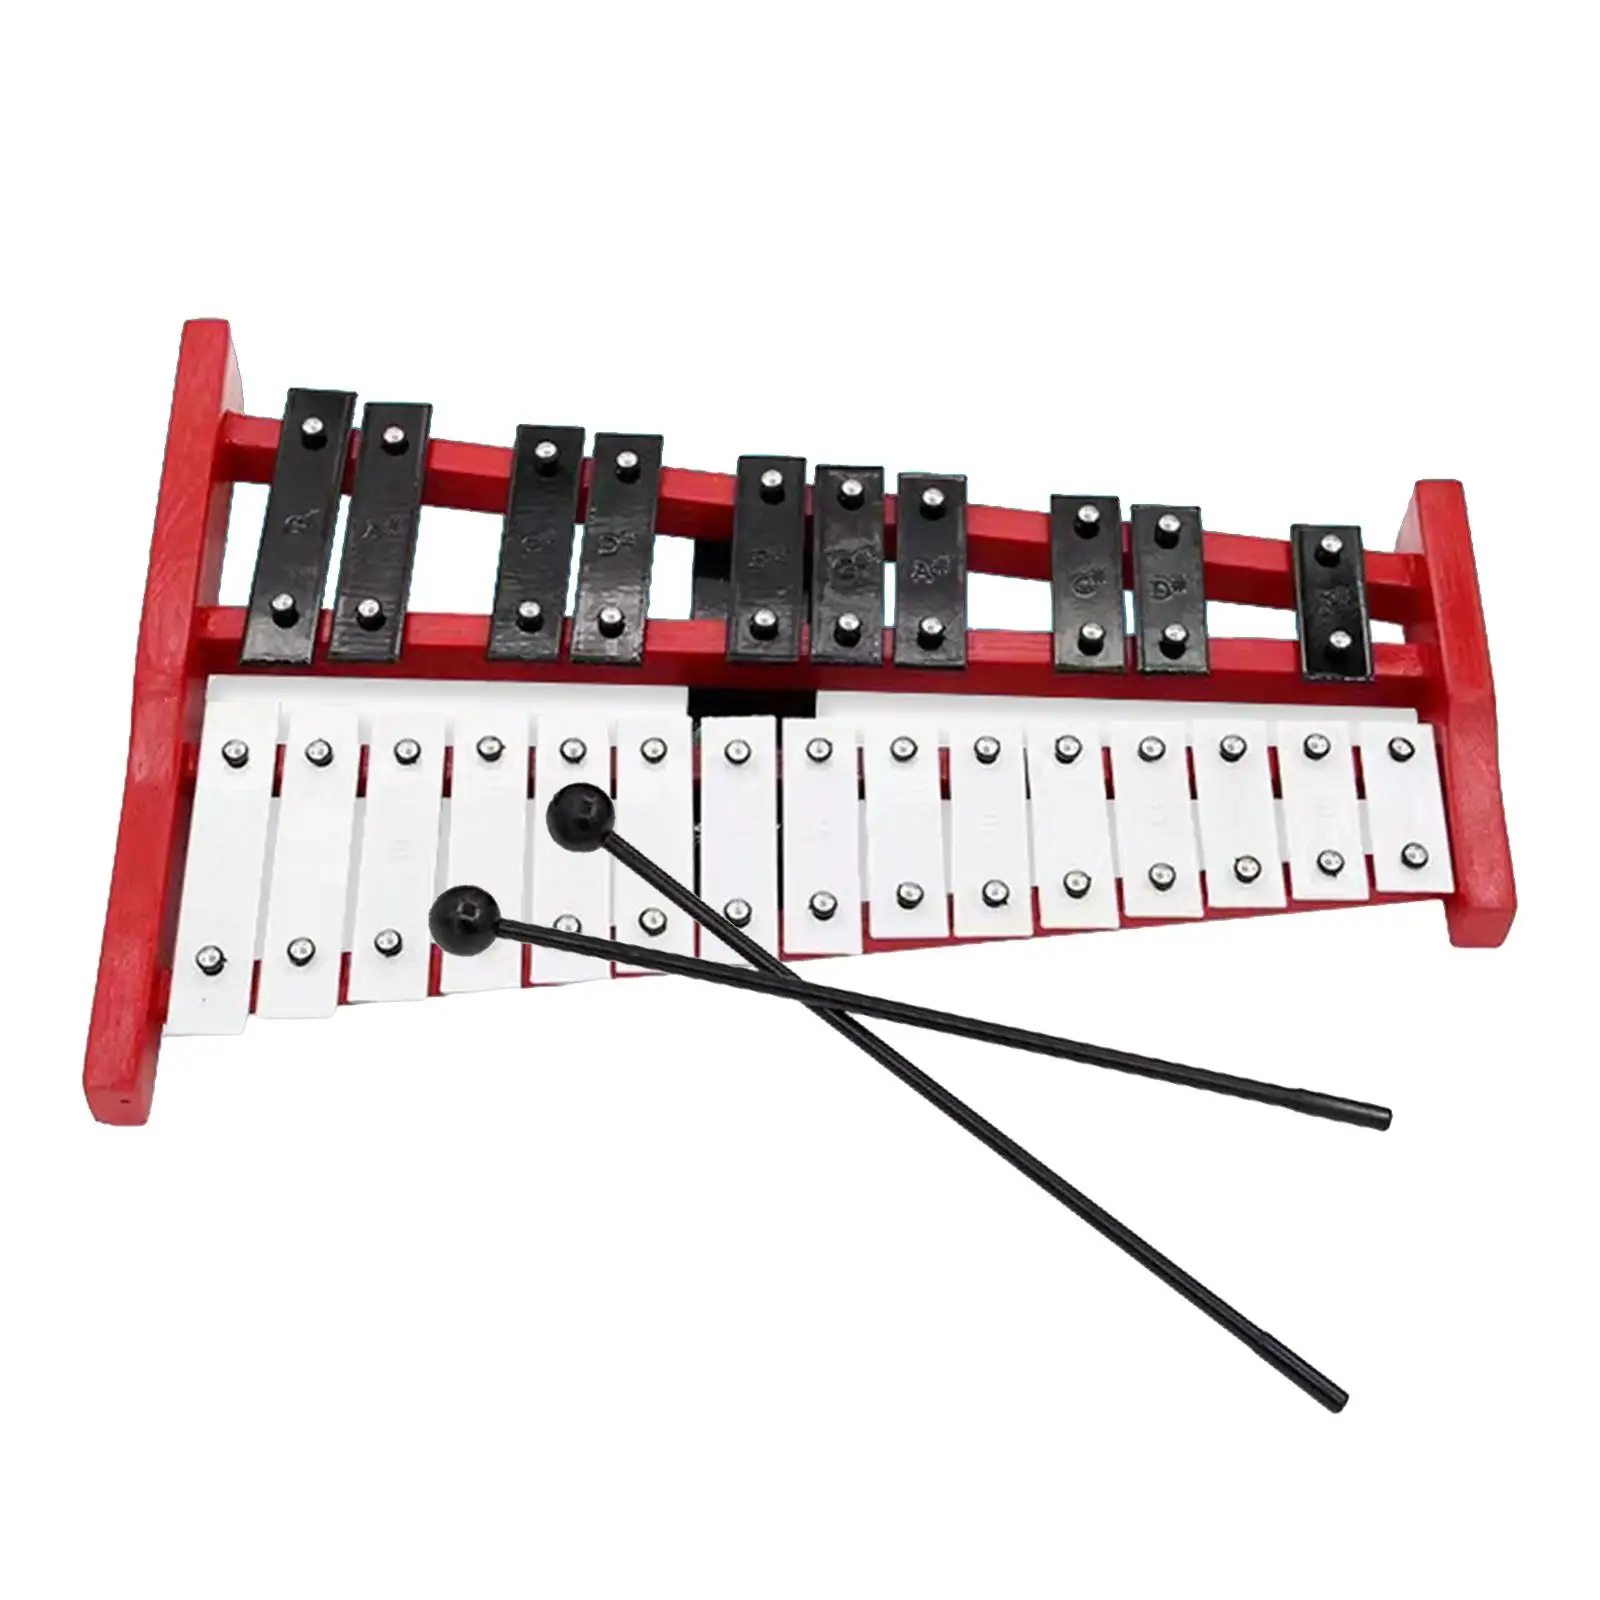 Musical Xylophone Wooden Wooden Percussion Toys Coordination 25 Note for Event Performance Music Lessons Outside